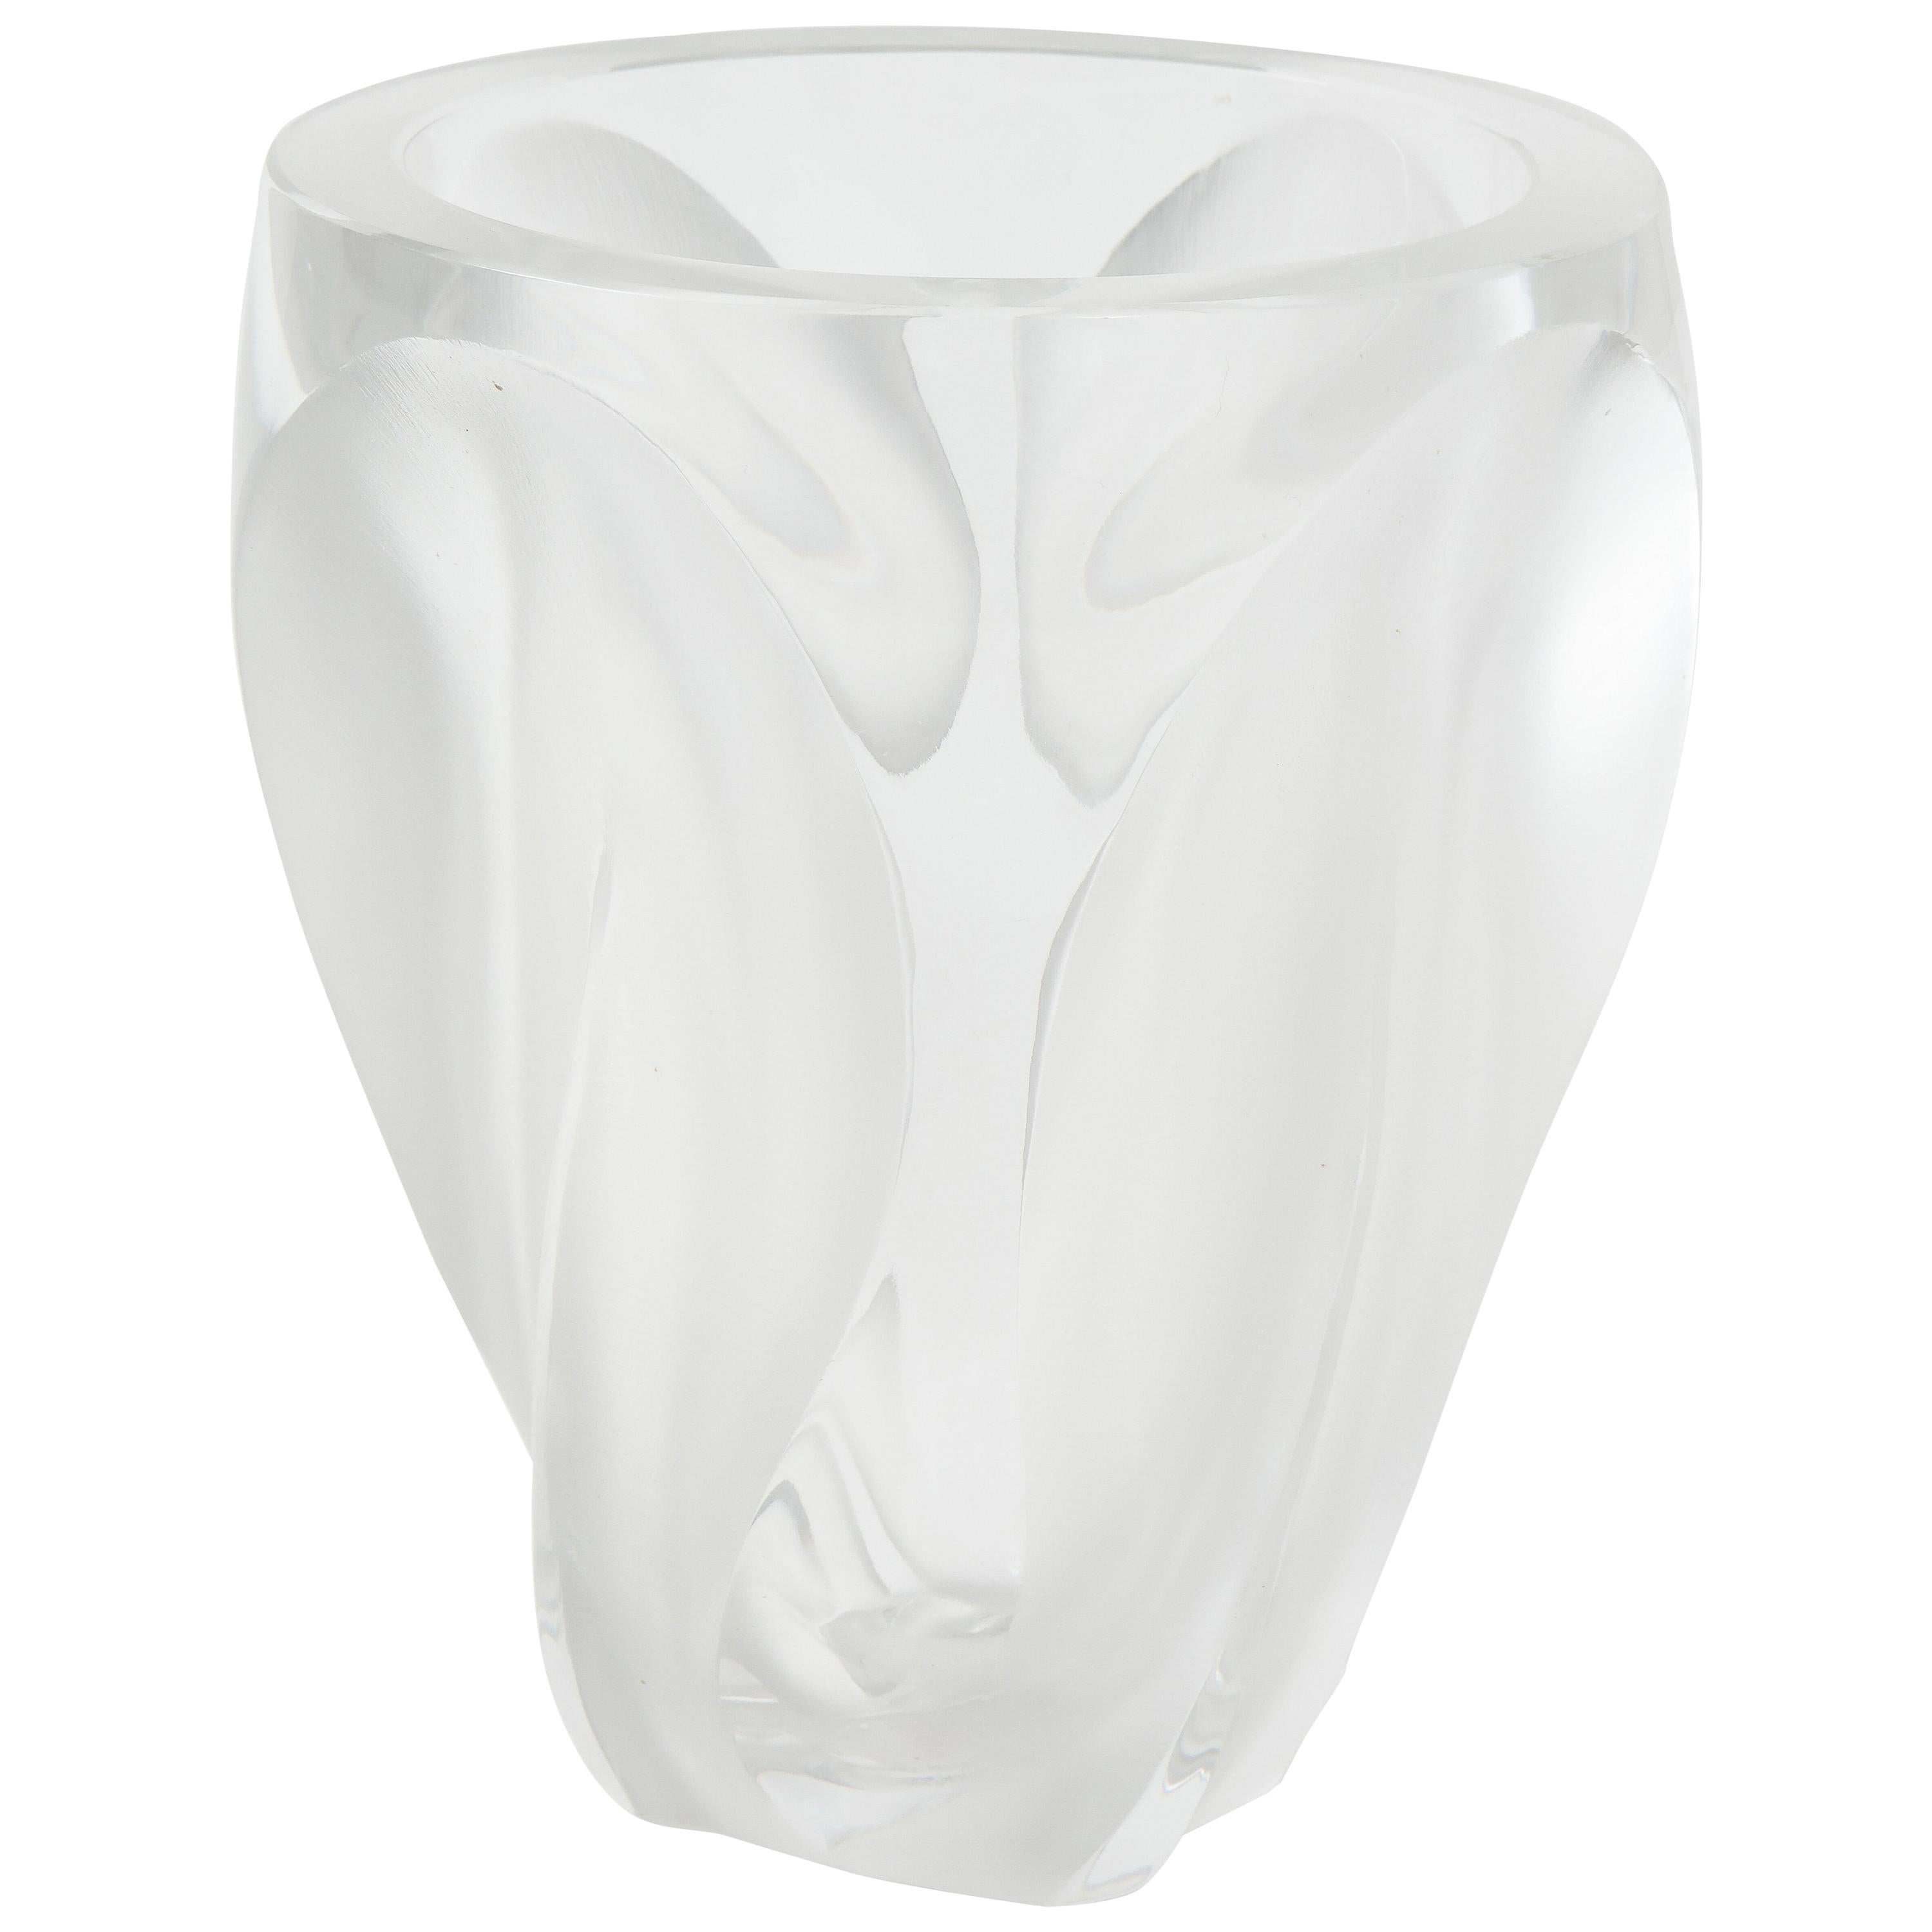 Crystal Glass Polished and Frosted "Ingrid" Vase by Lalique